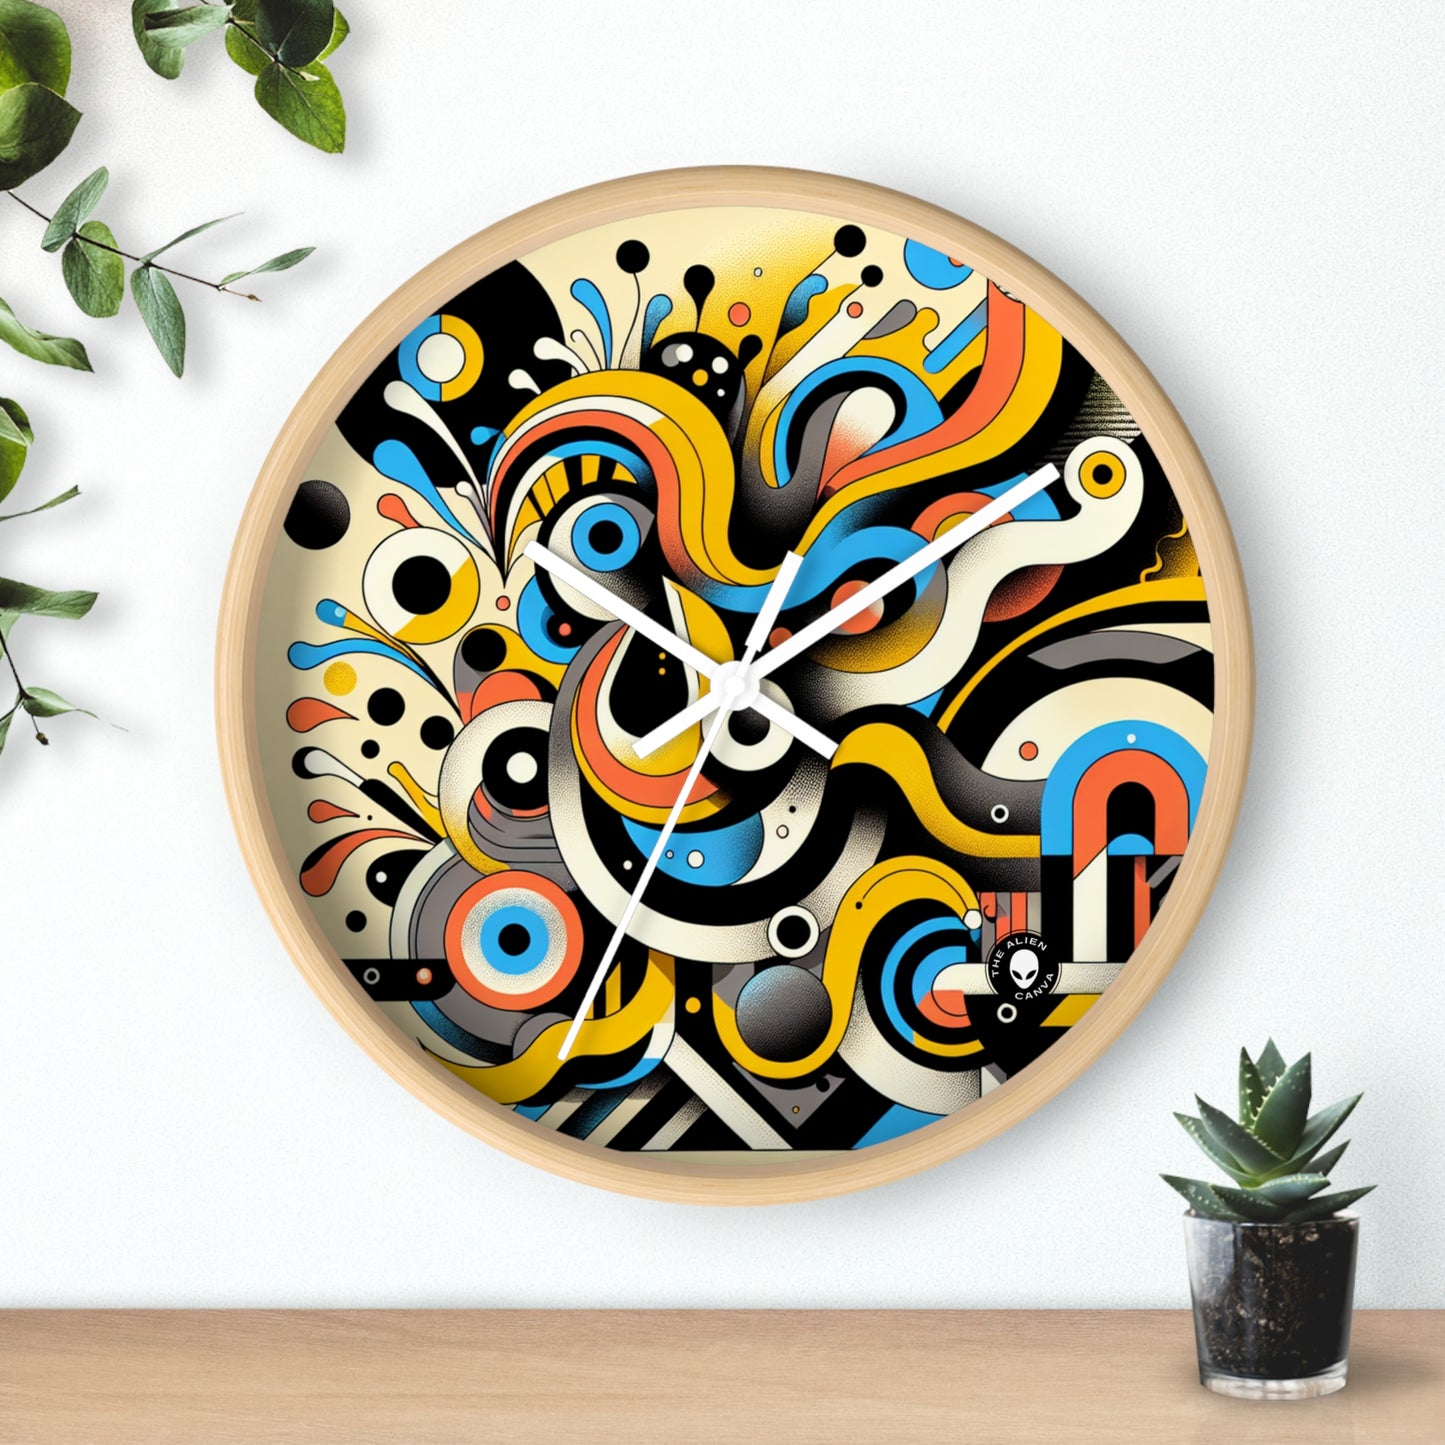 "Dada Fusion: A Whimsical Chaos of Everyday Objects" - The Alien Wall Clock Neo-Dada